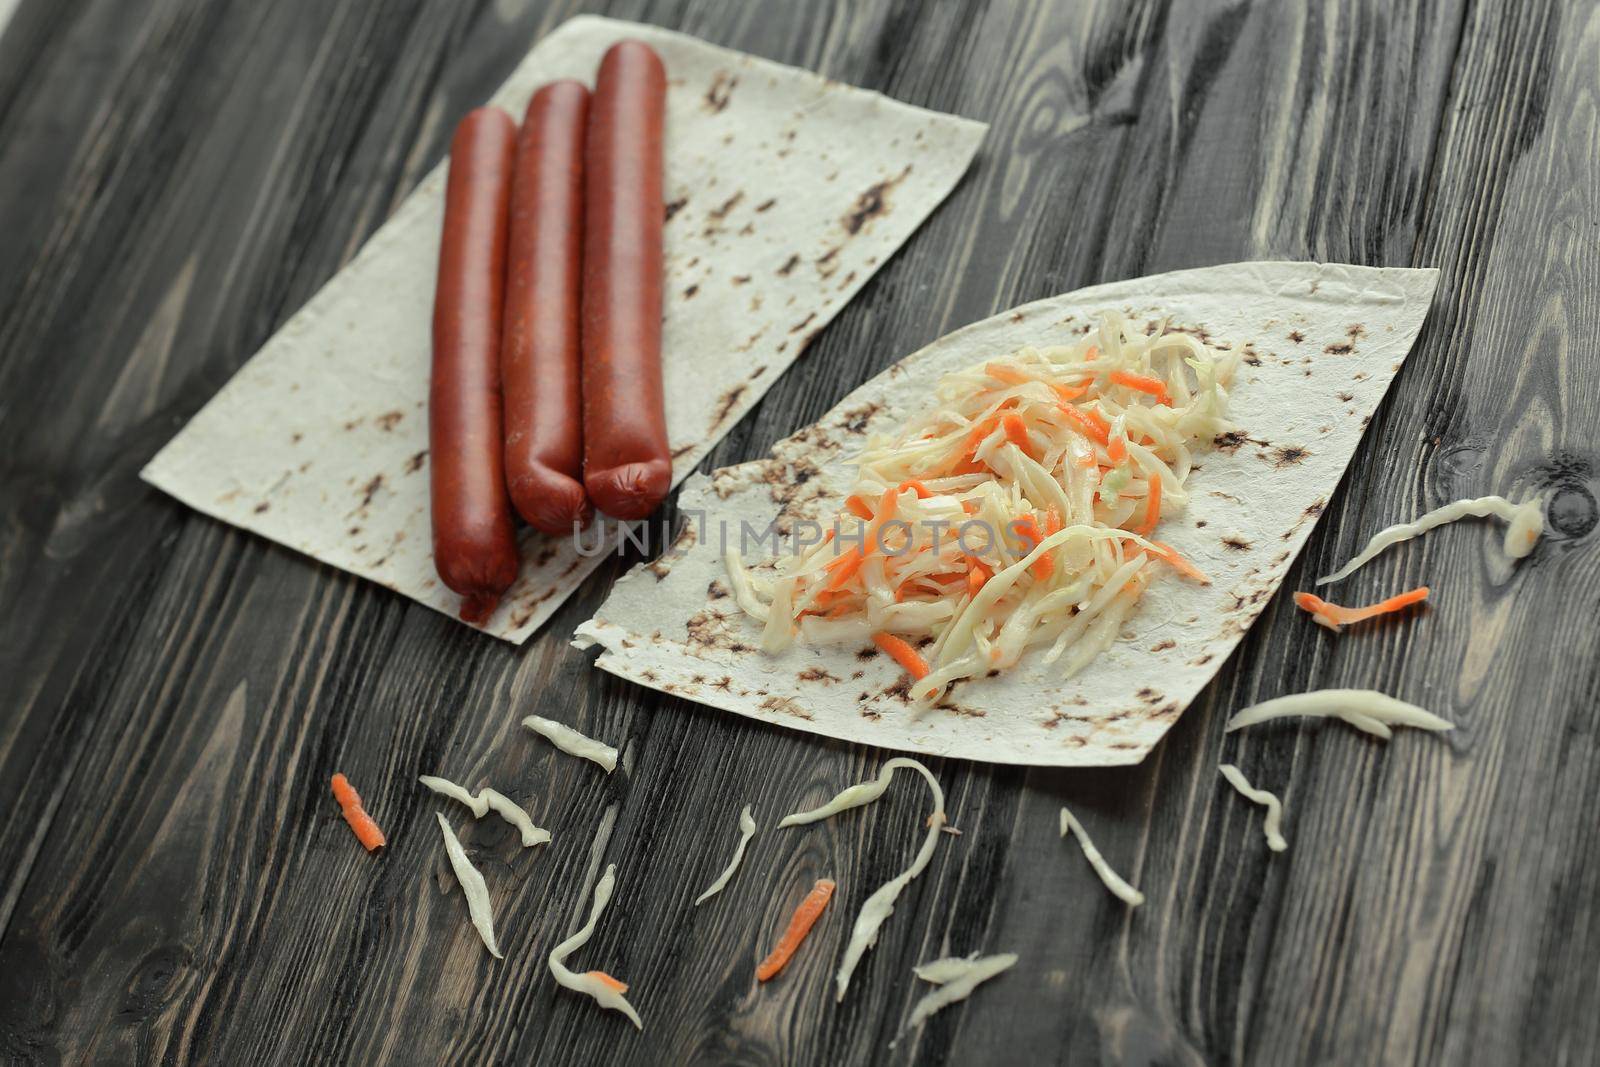 delicate sausages ,cabbage and pita bread on wooden background.